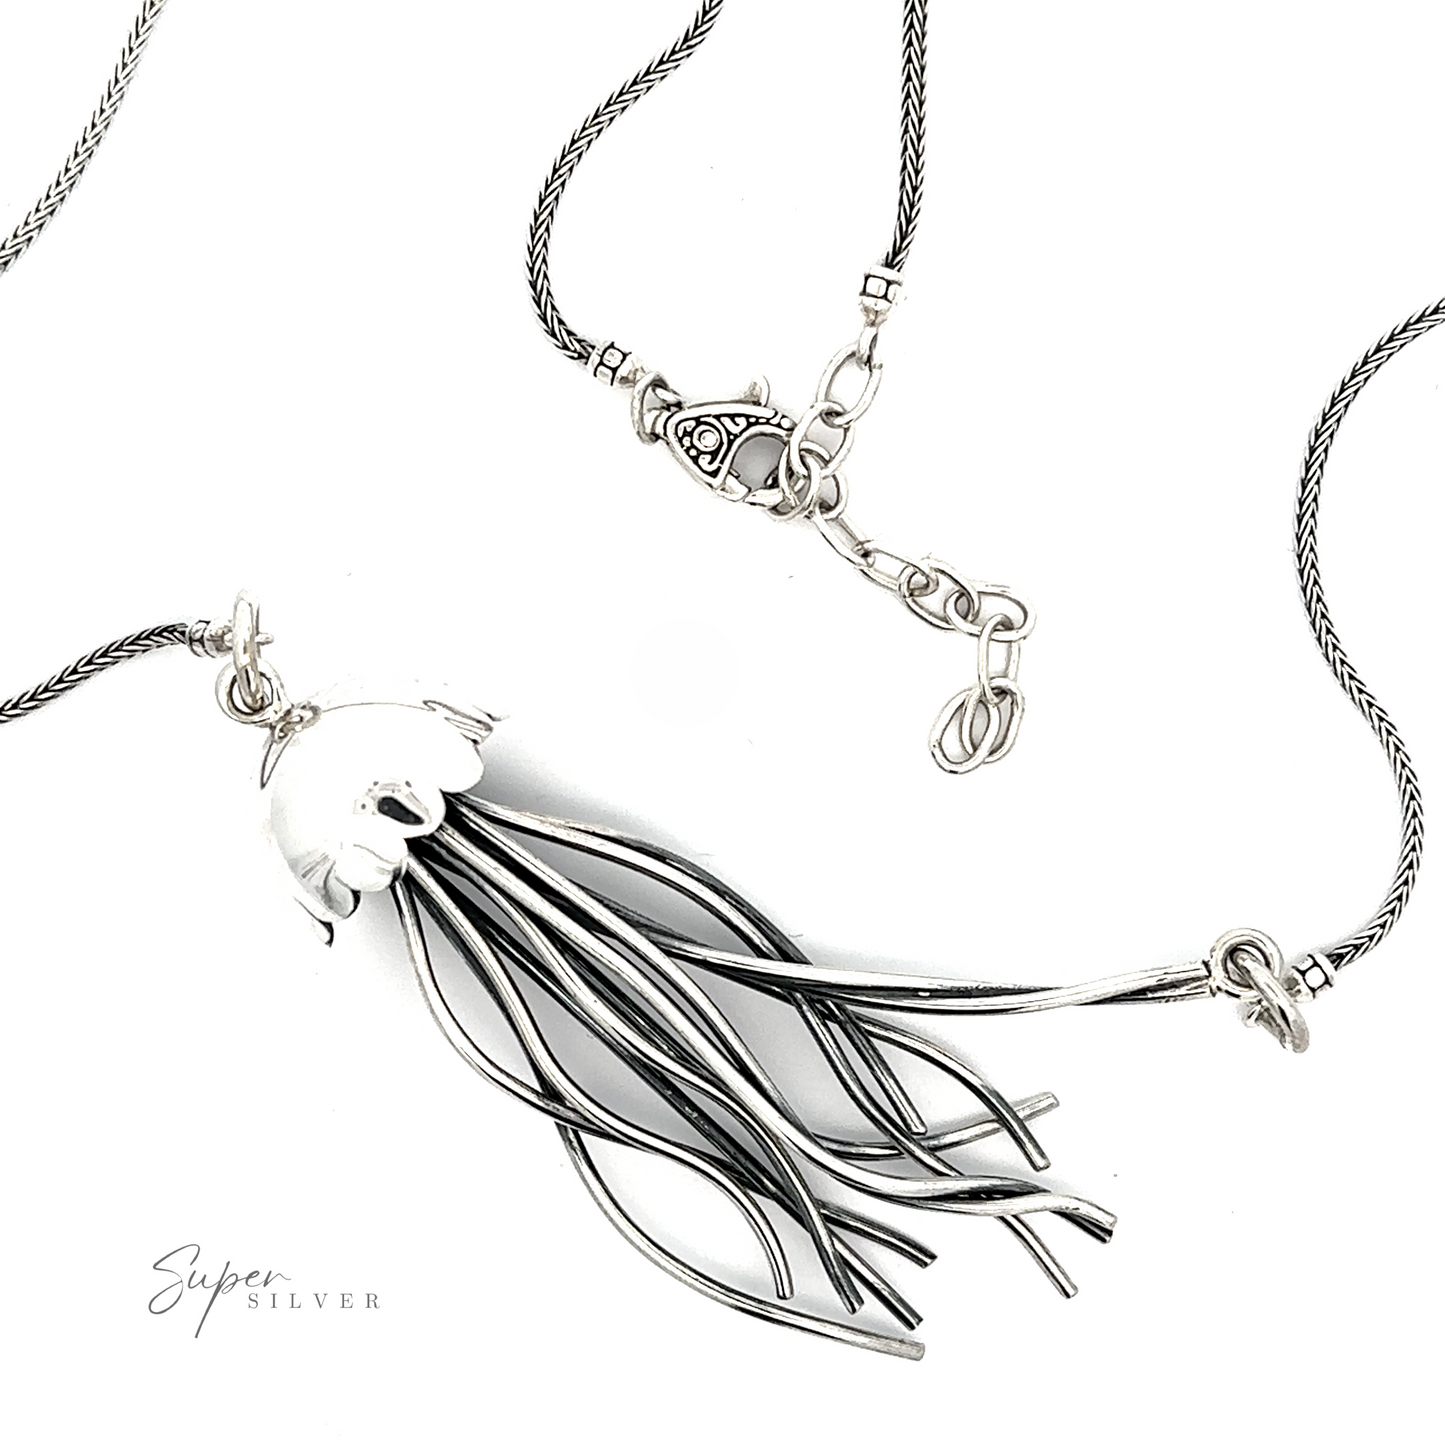 Jellyfish necklace featuring a pendant with a stylized, elongated bird design, displayed on a light background with a signature in the corner.